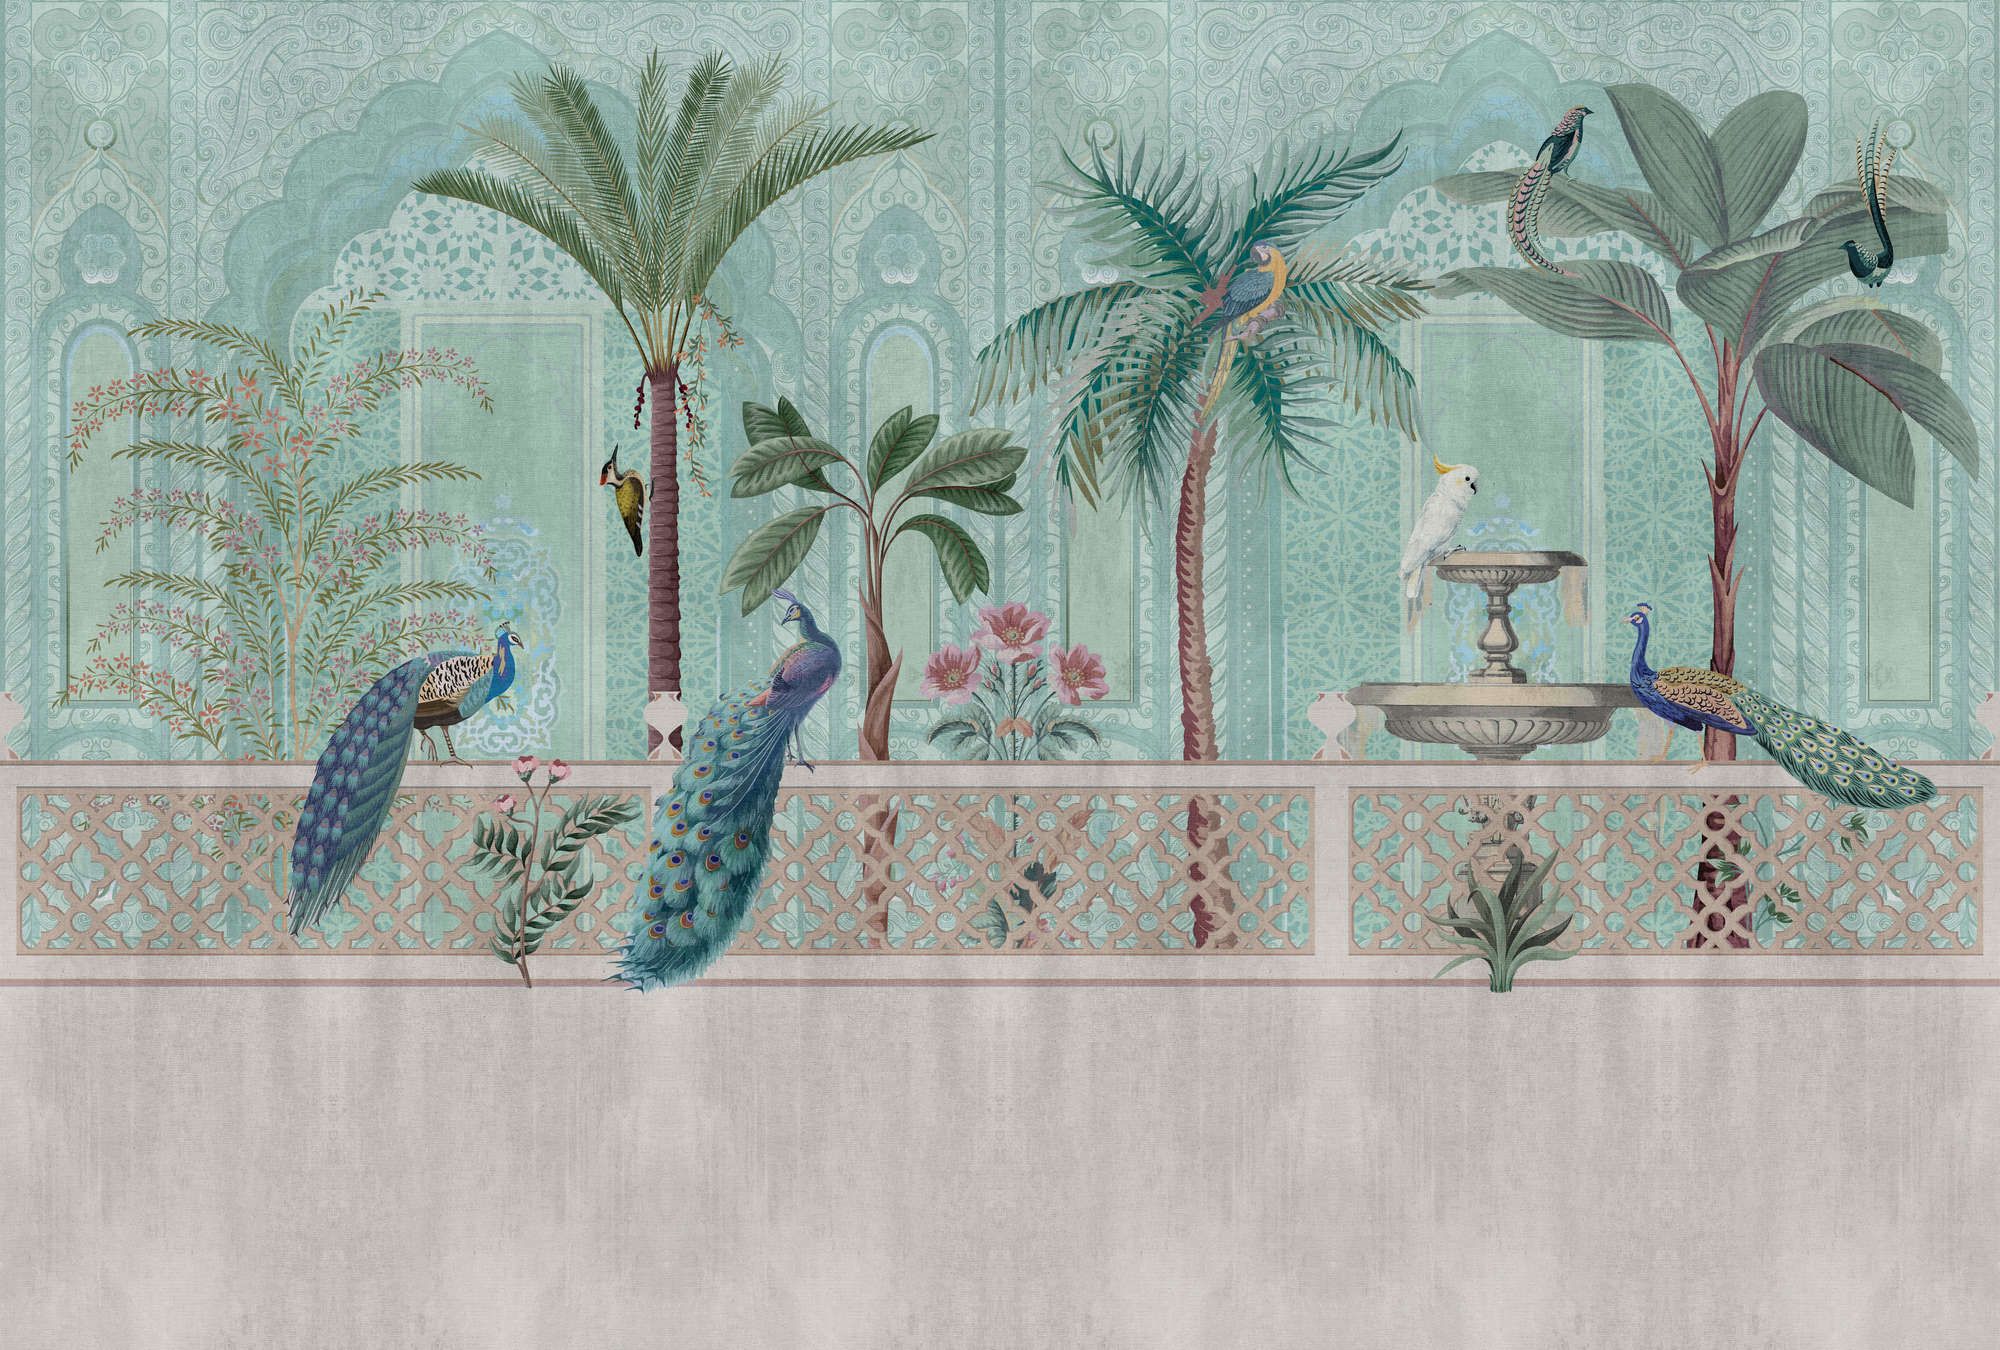             Photo wallpaper »pavo« - Birds, palm trees & fountains - Green, blue with tapestry structure | Lightly textured non-woven
        